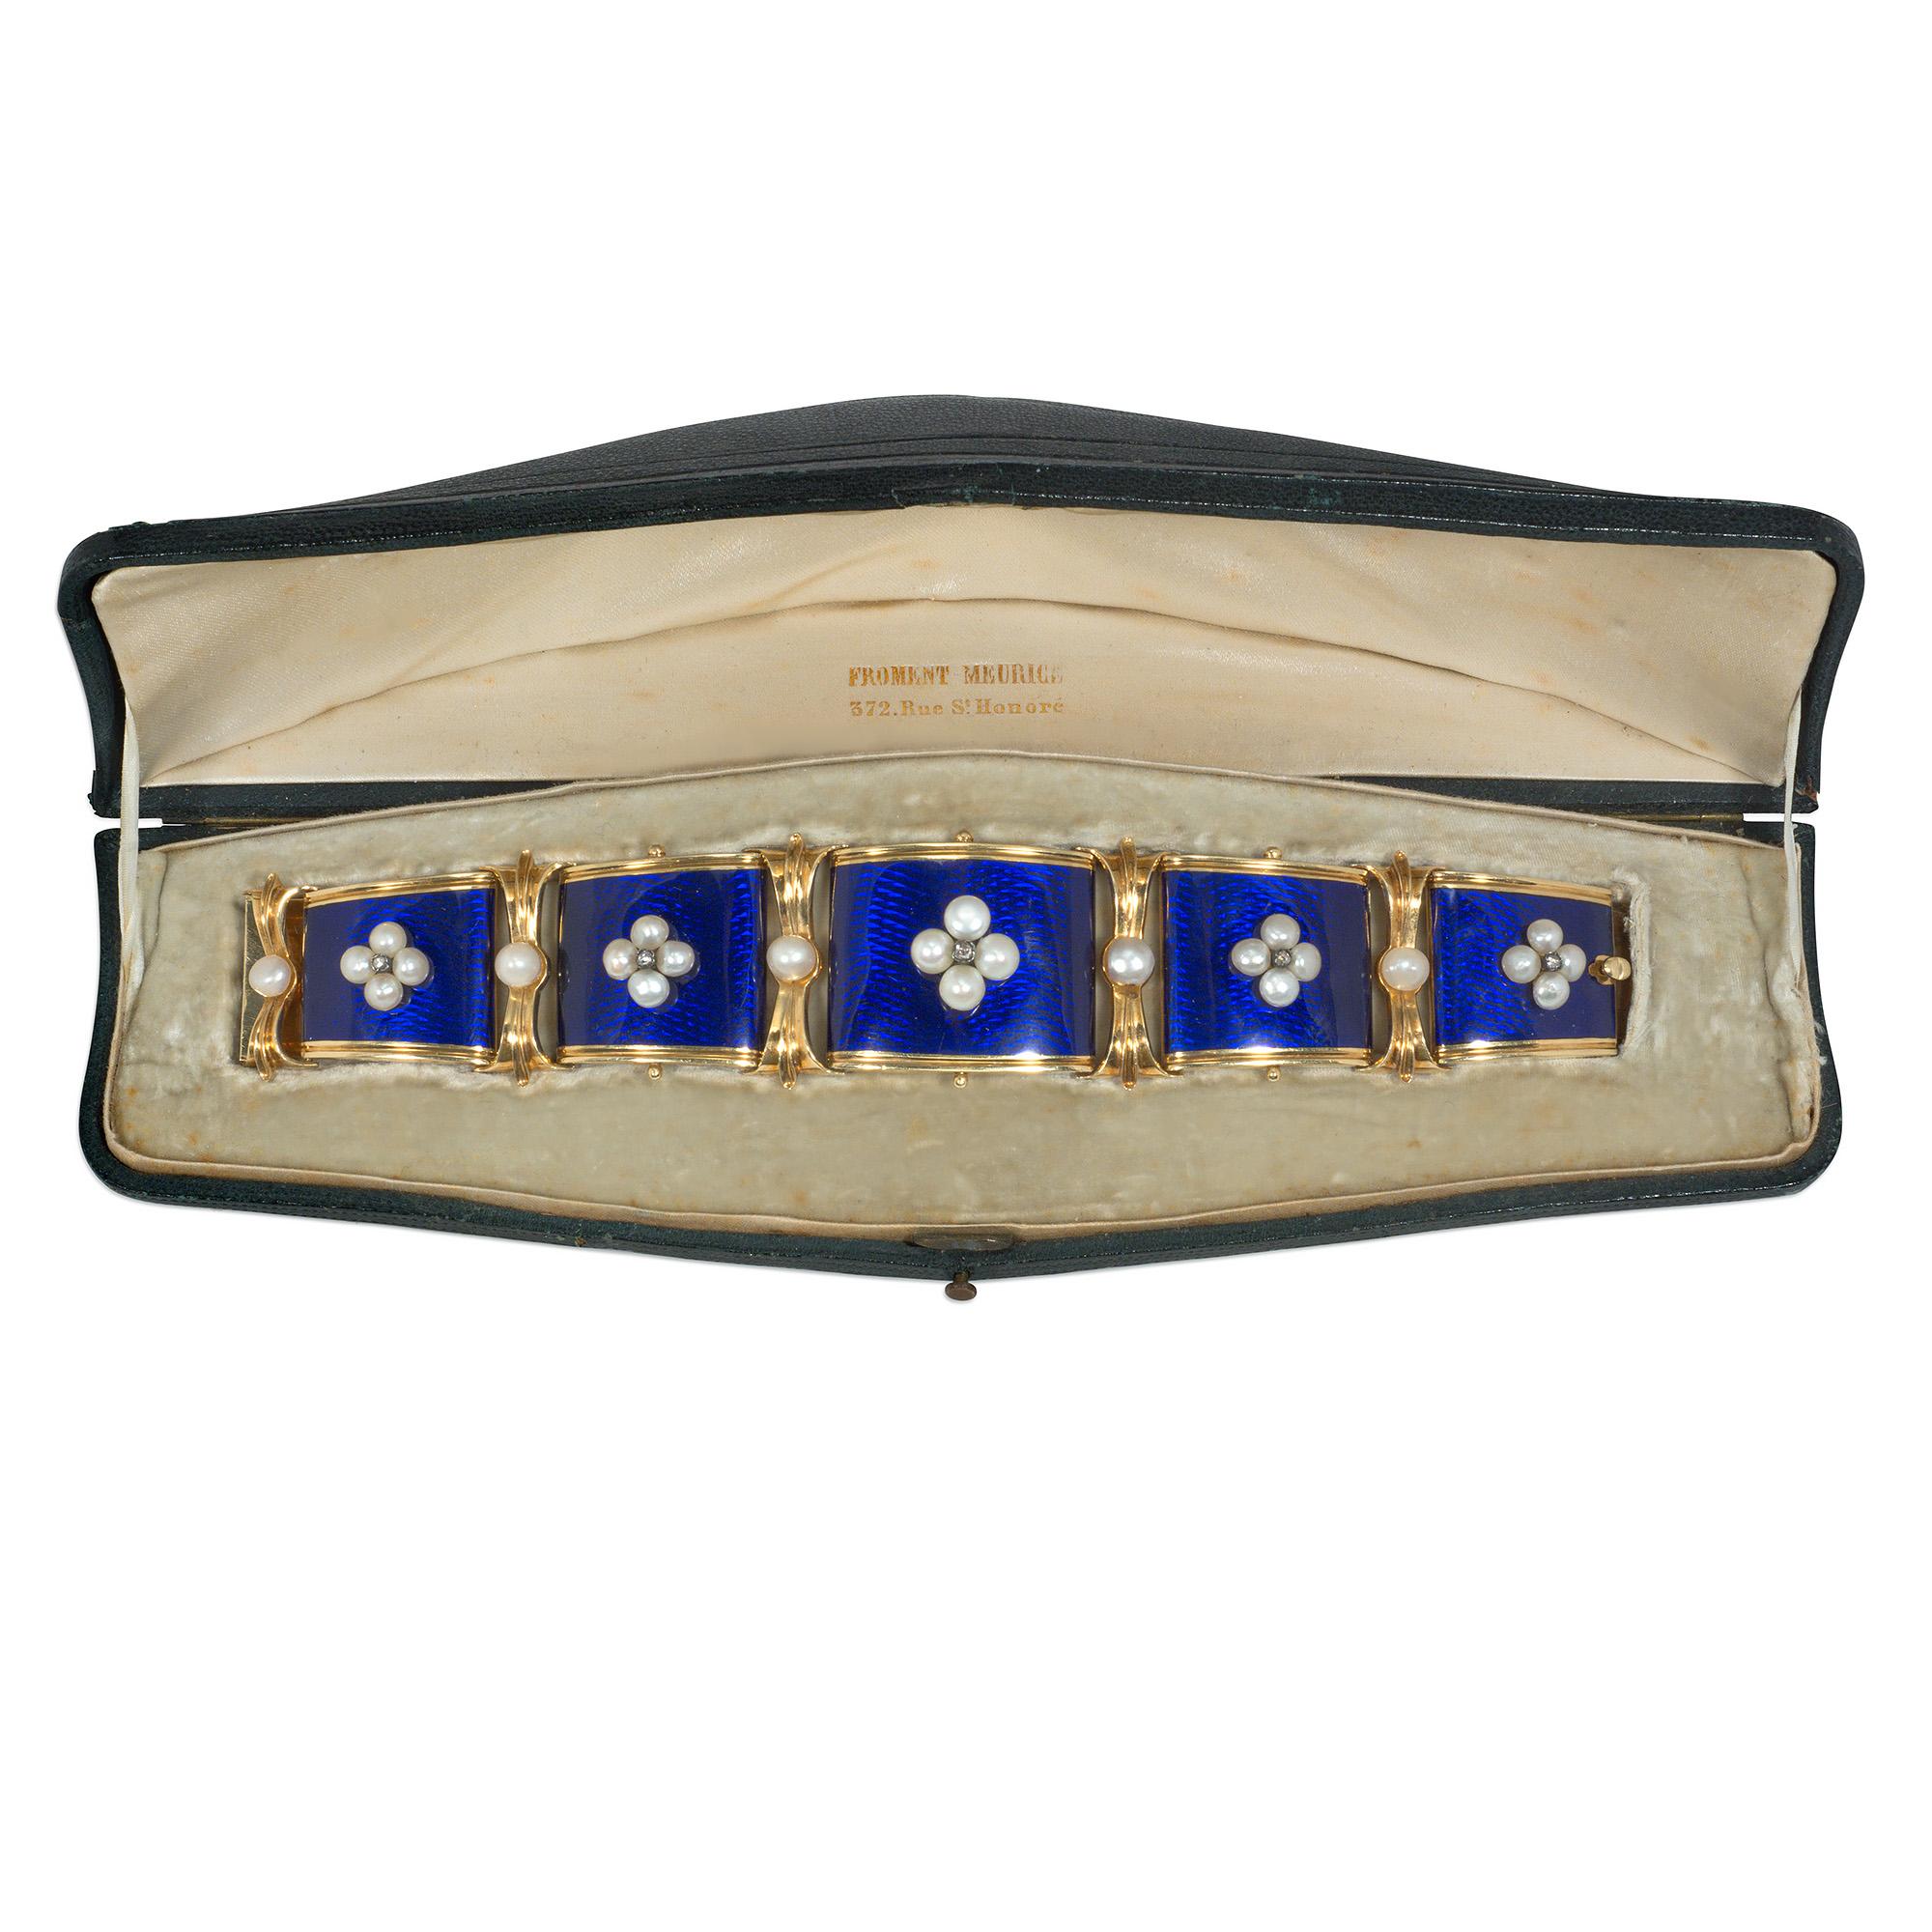 Rose Cut Antique Gold, Blue Enamel, and Pearl Bracelet in Original Froment-Meurice Box For Sale